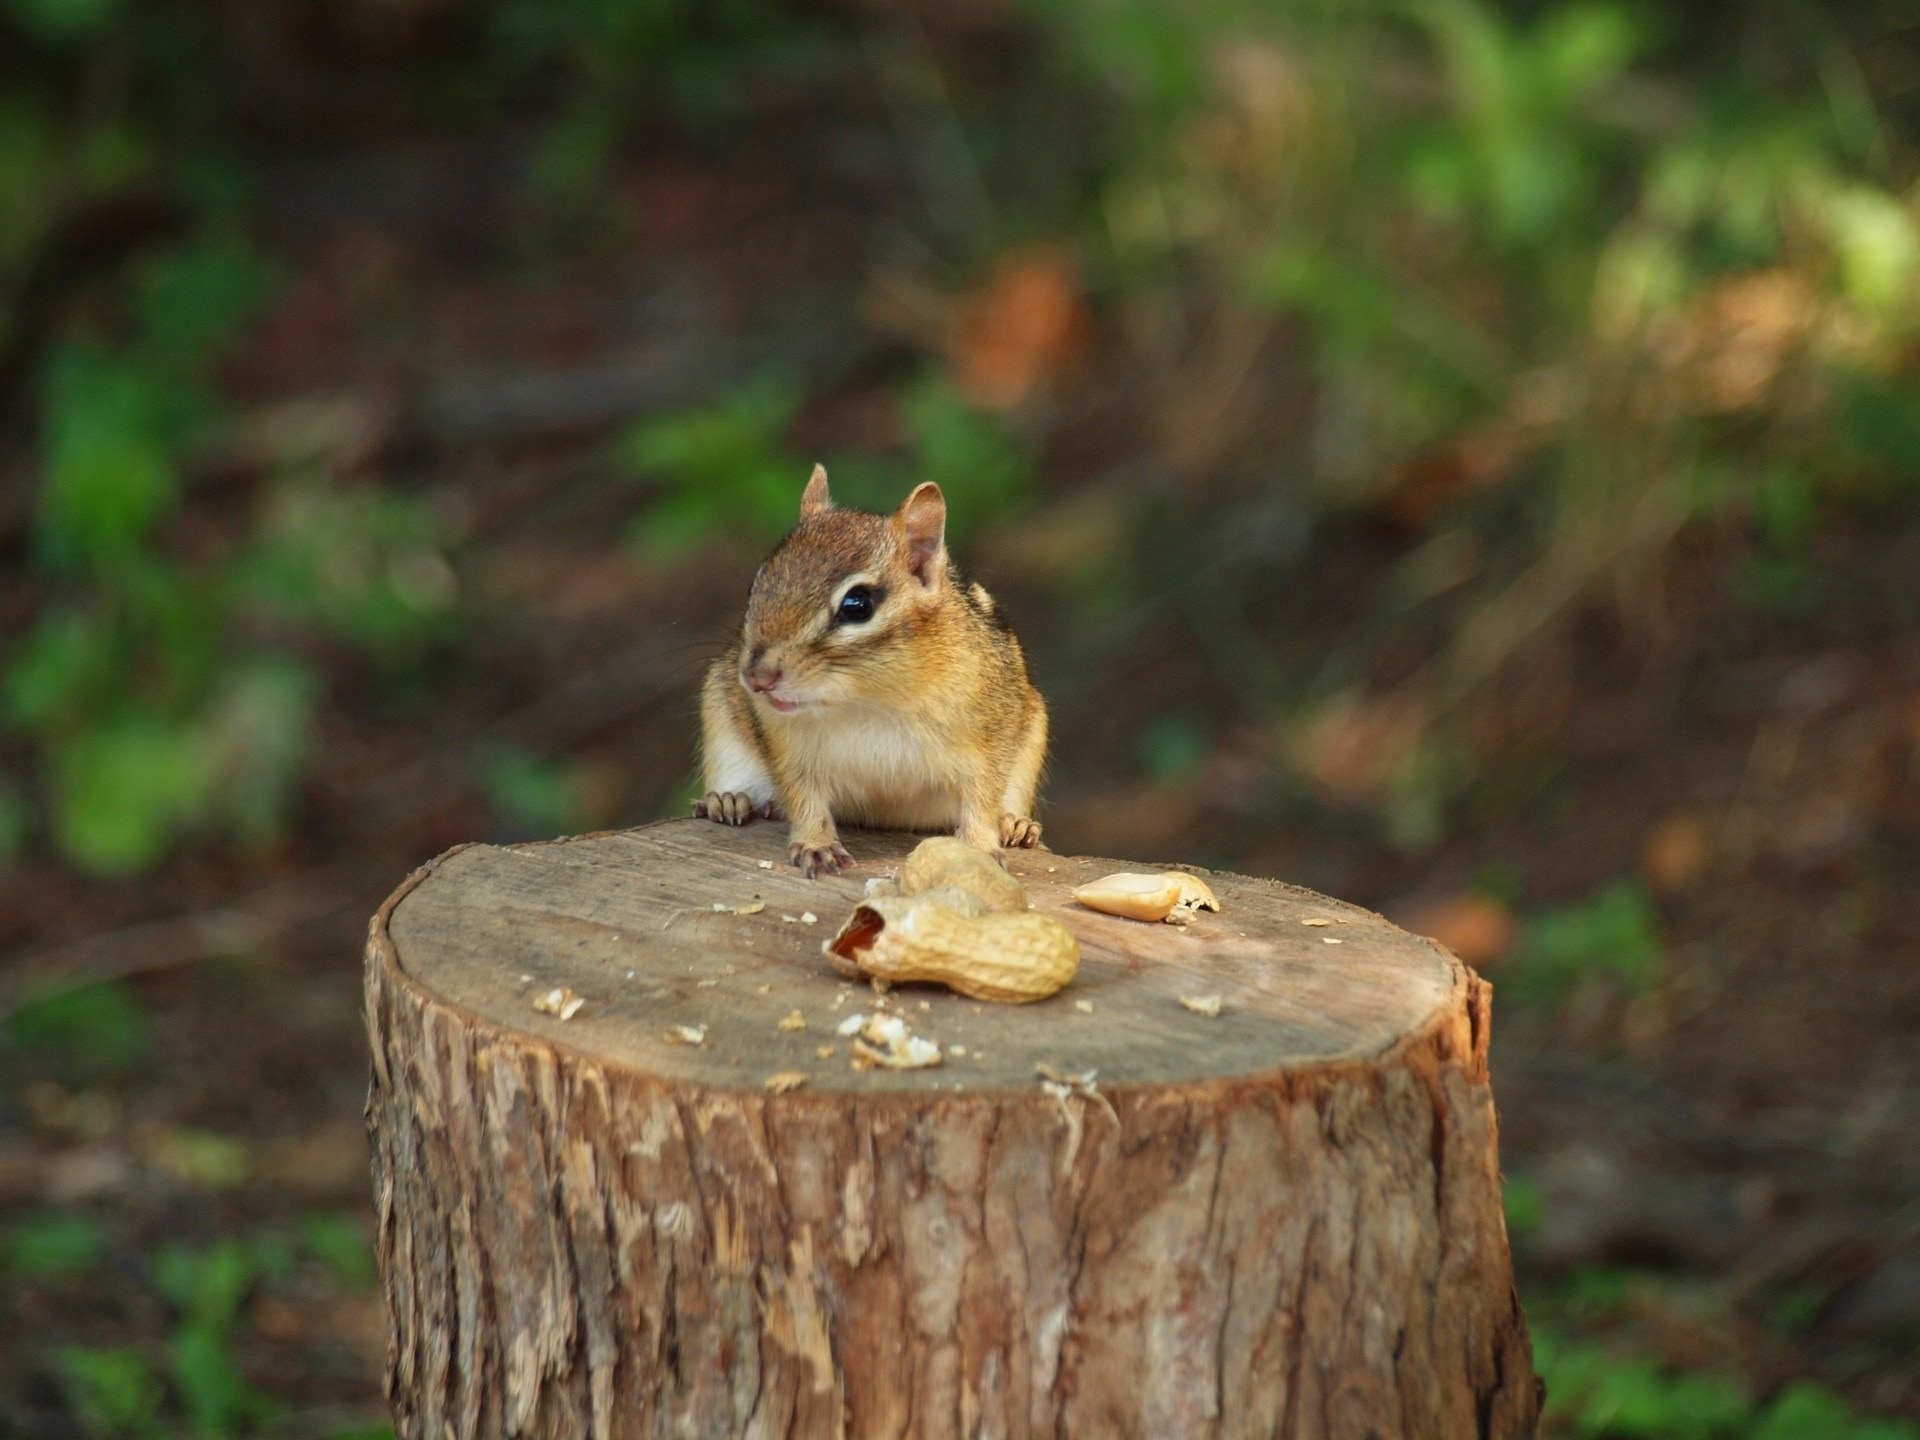 gray and white squirrel standing on wood log